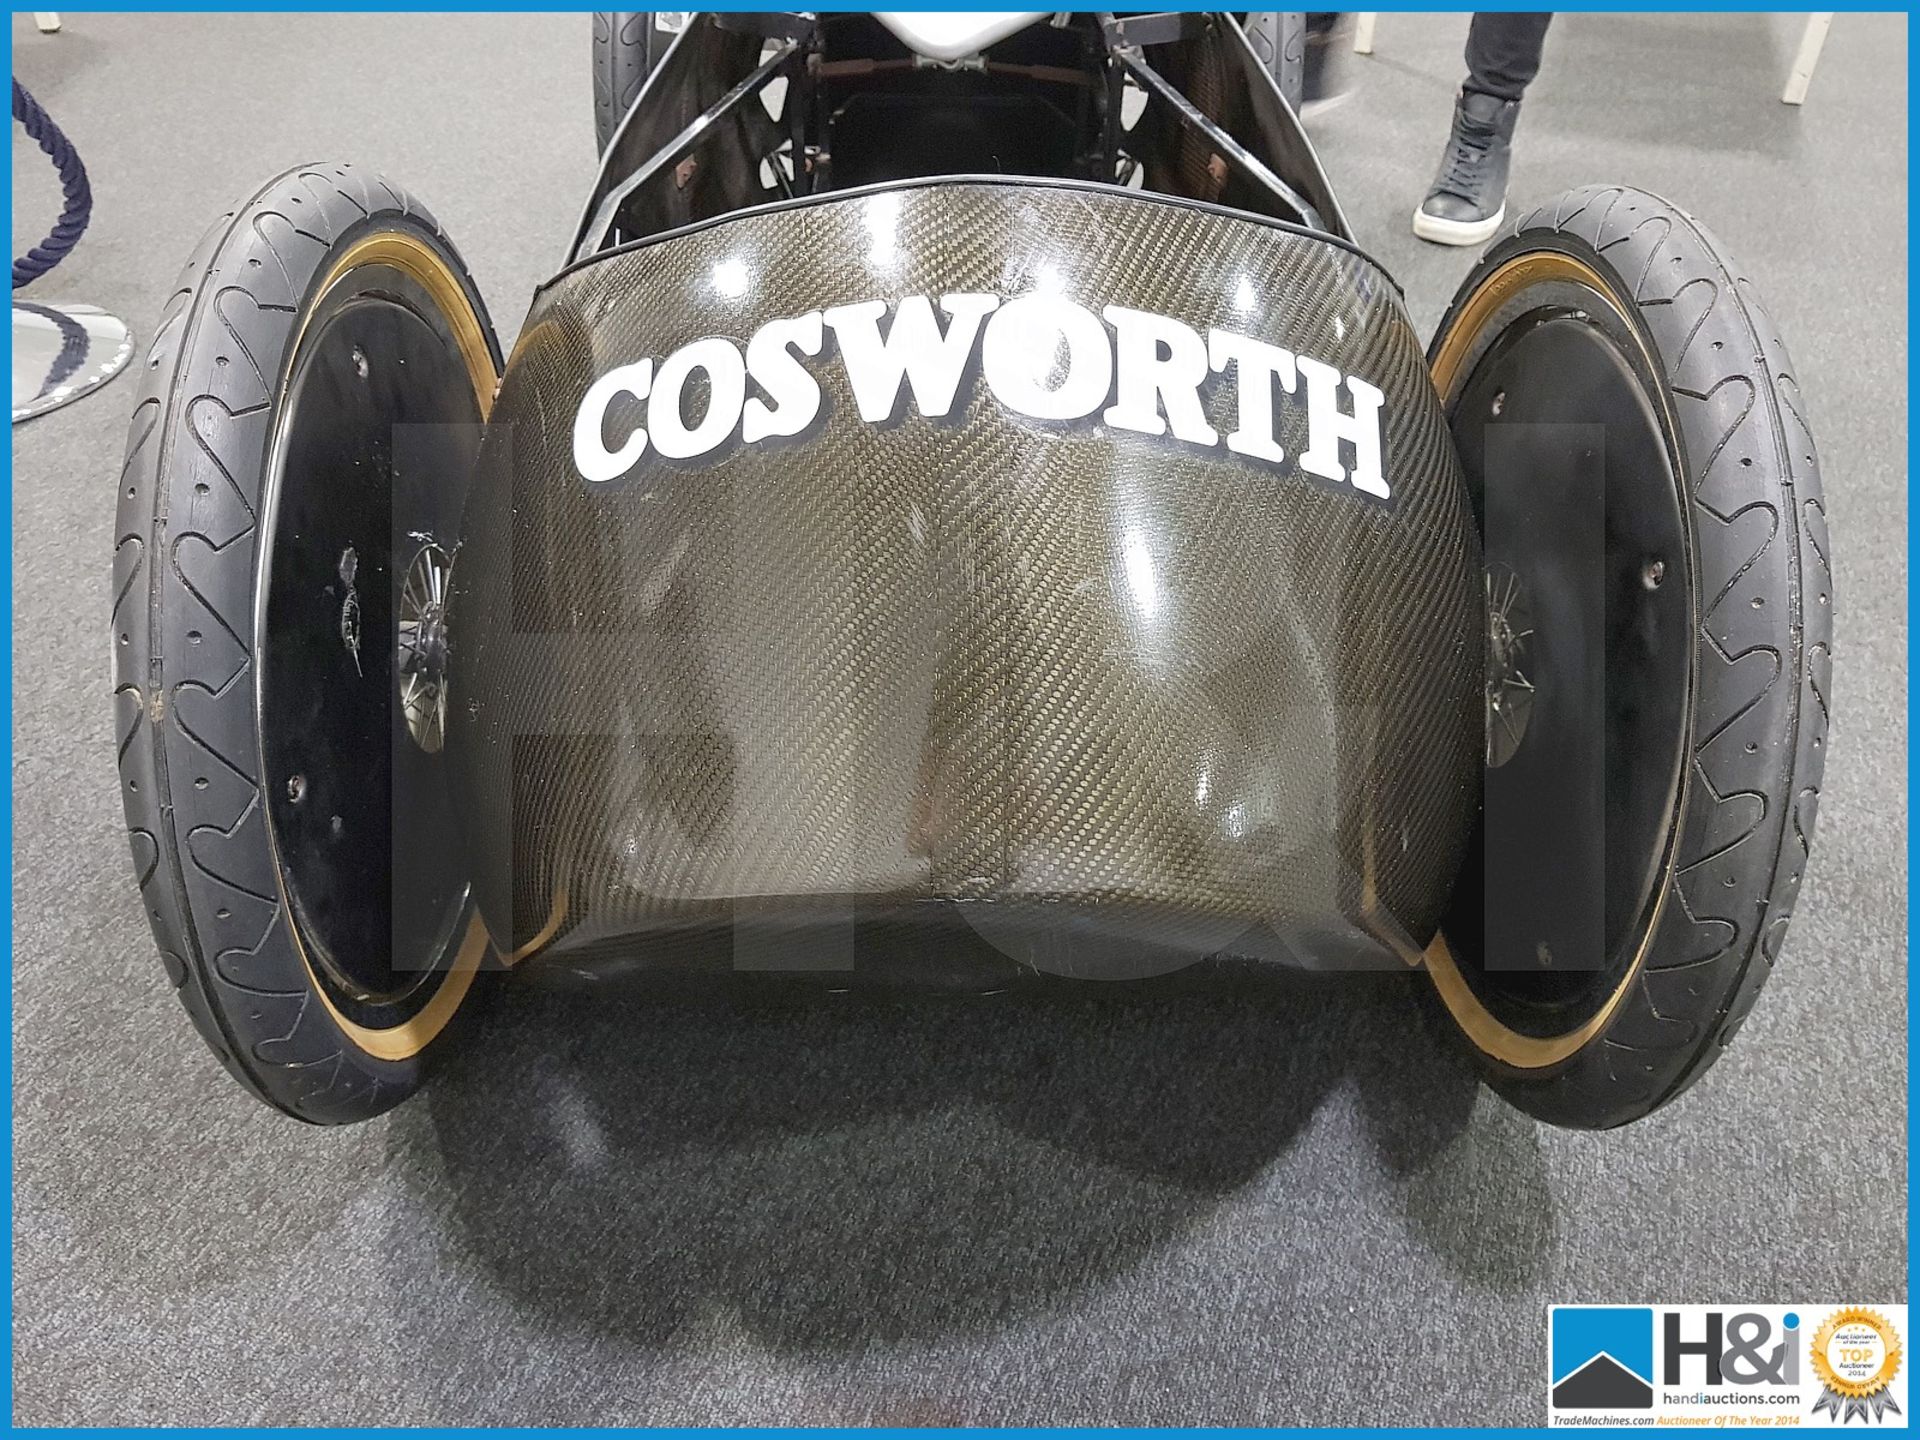 Barry Sheene carbon fibre racer. The down hill racer was designed and built by a team from Cosworth - Image 3 of 9